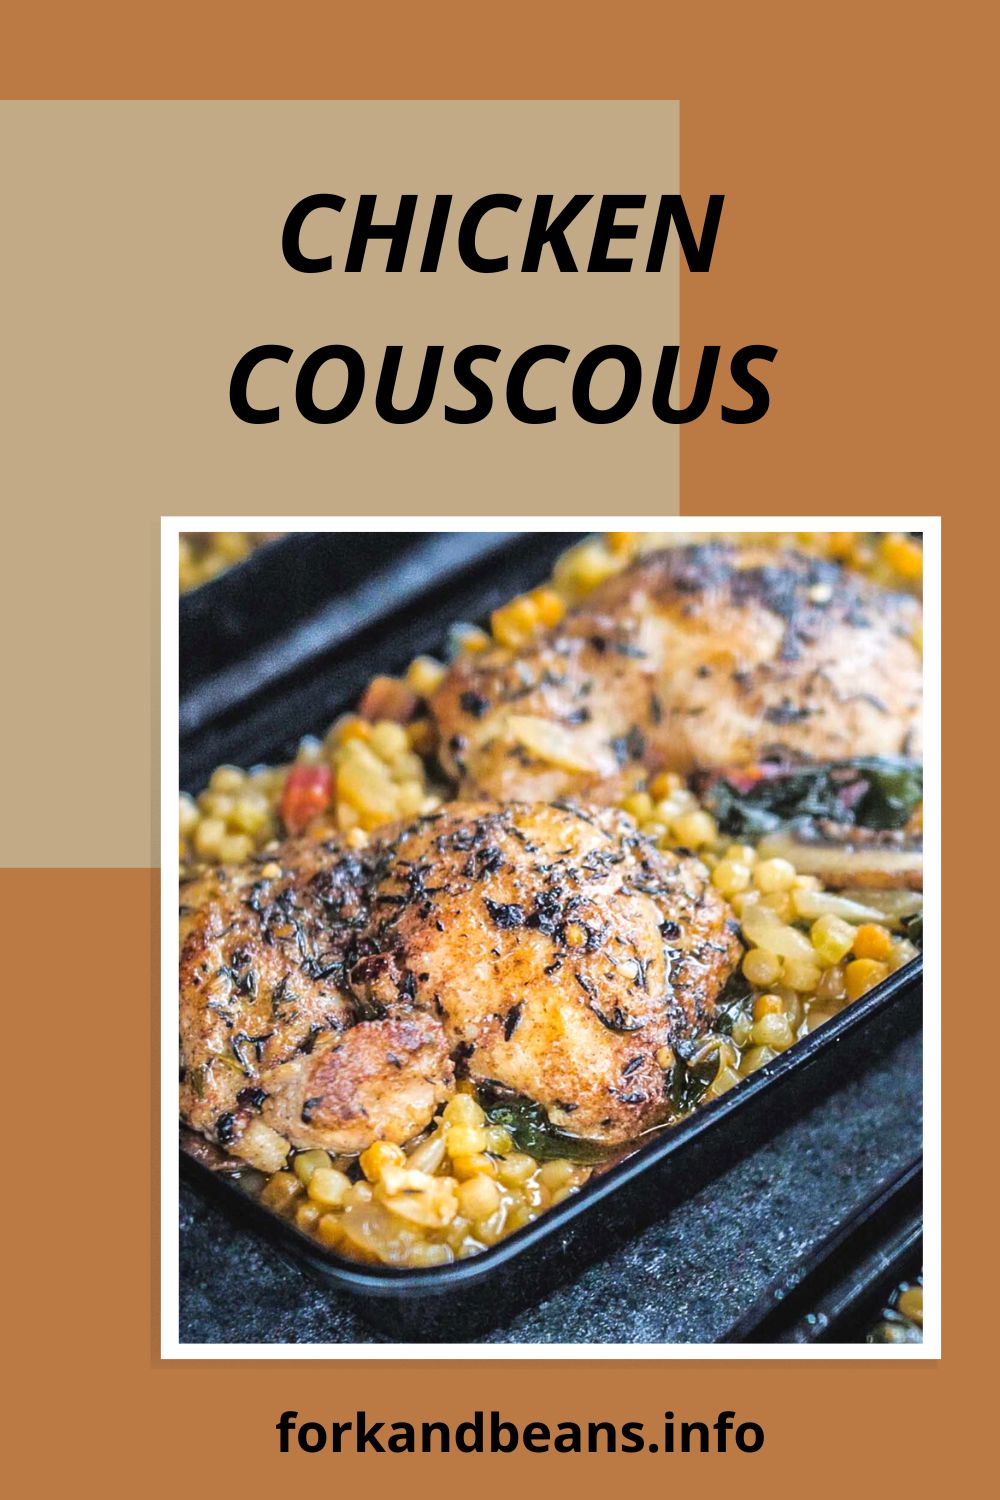 Recipe for Chicken Couscous